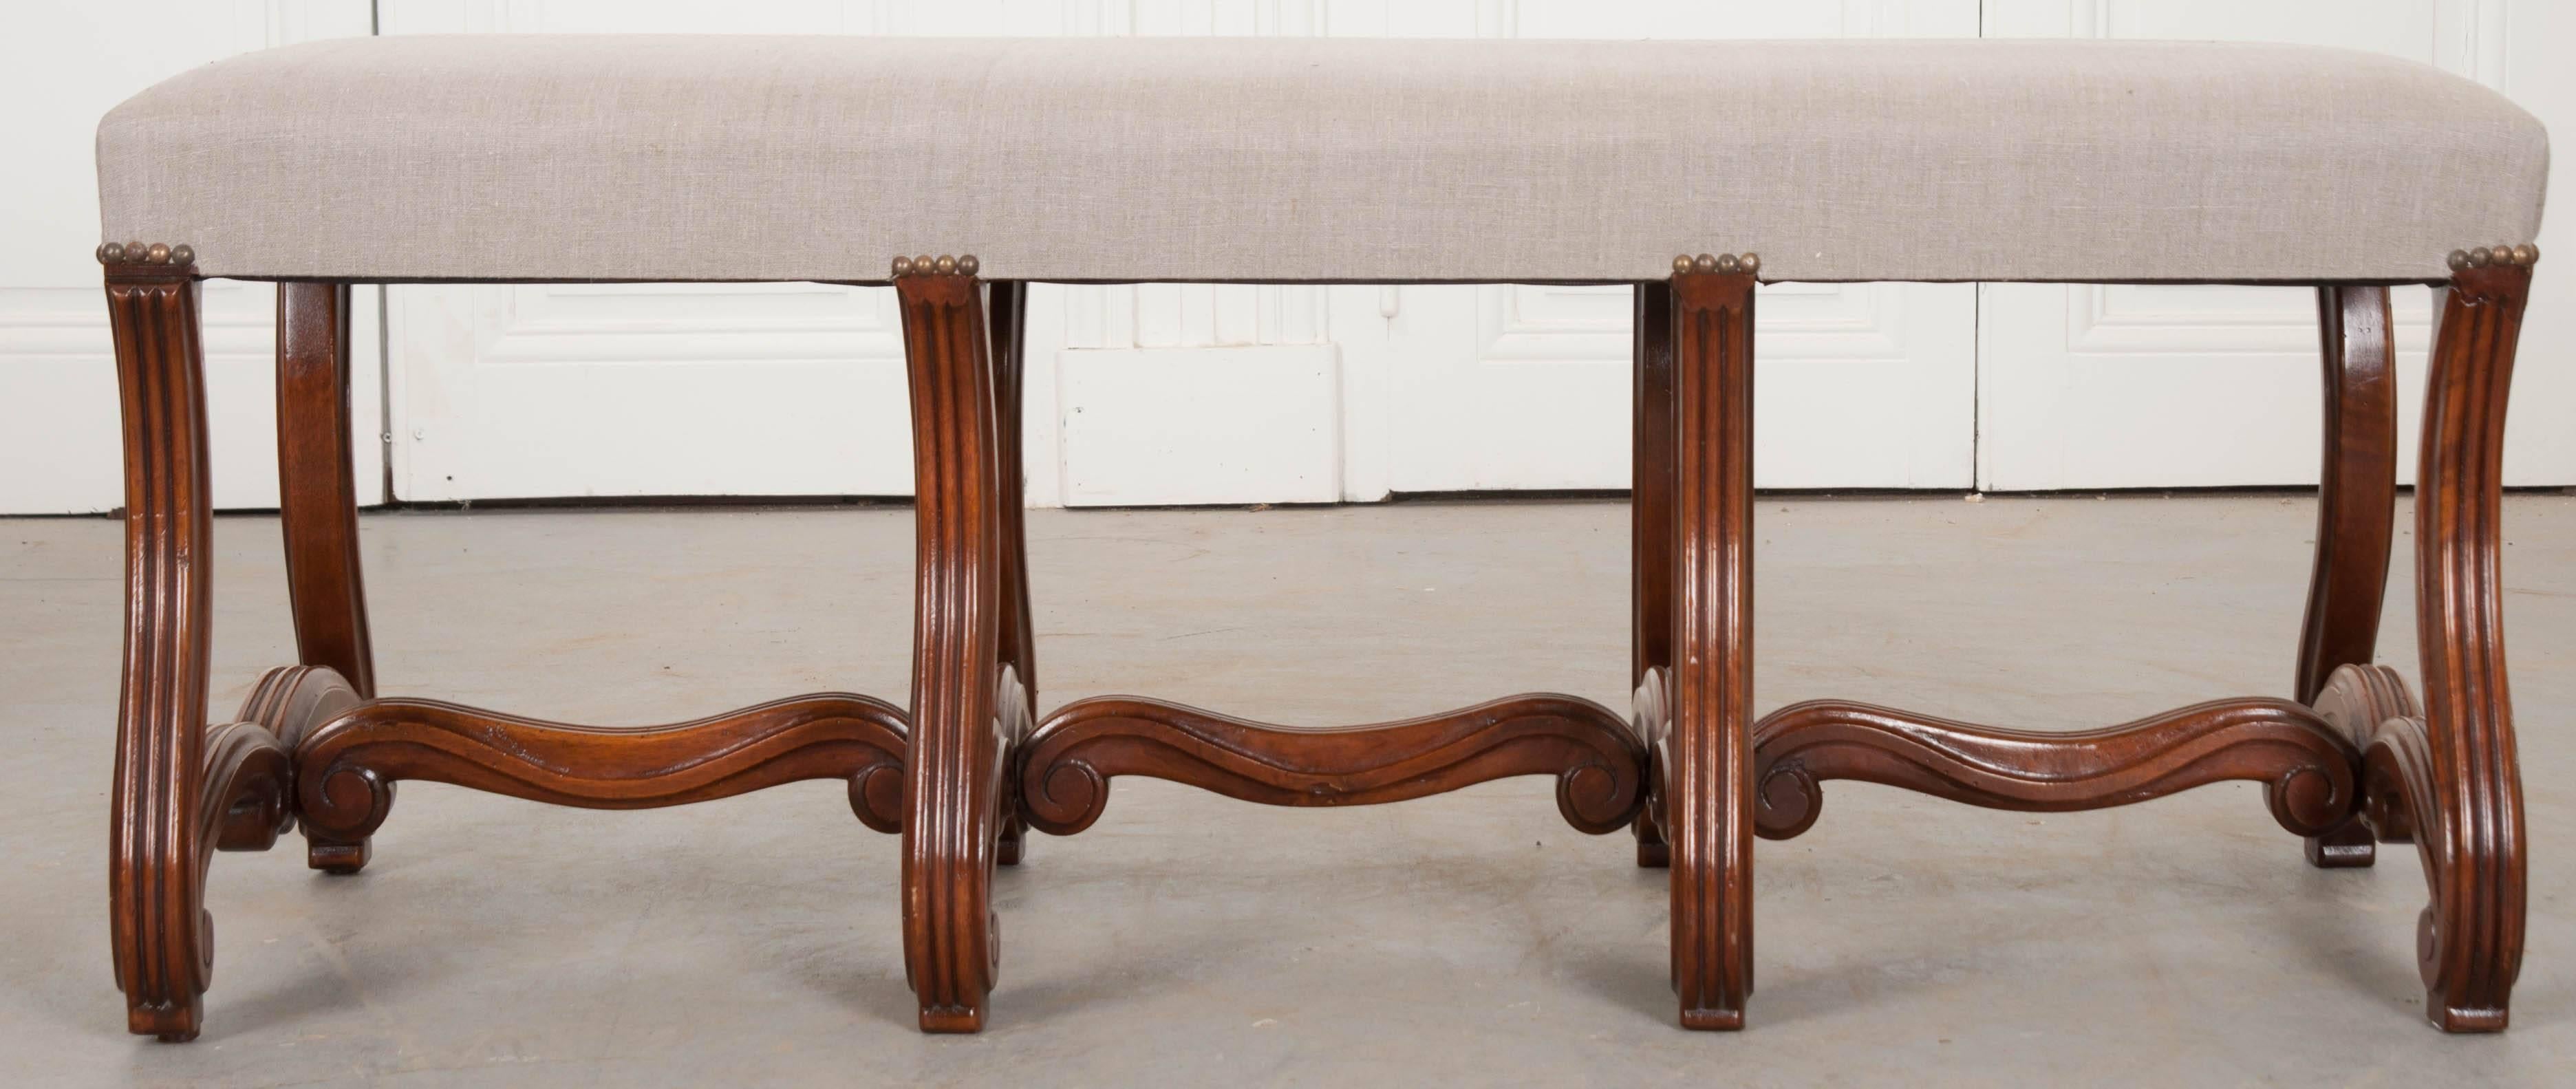 Pair of 19th Century French Louis XIV Style Mahogany Benches 1